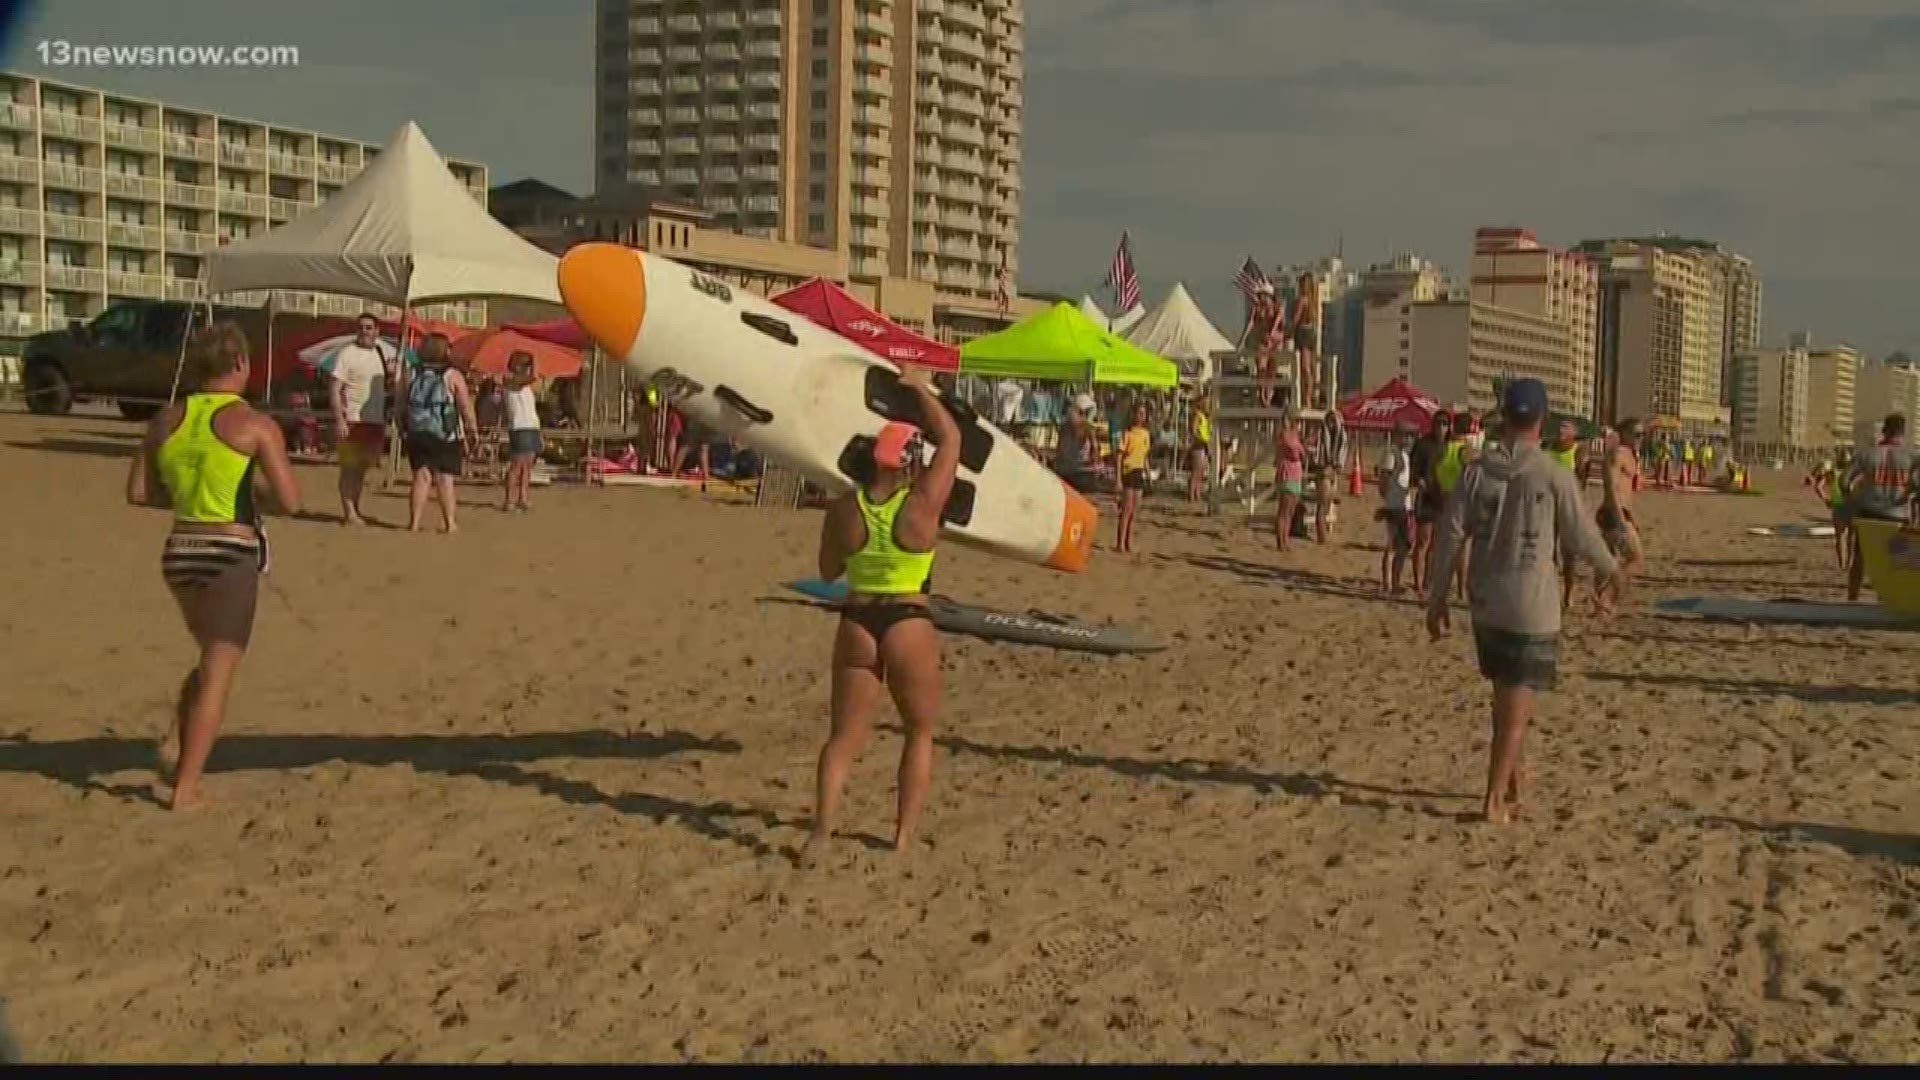 With the blow of a whistle on Thursday, three days of the professional lifeguard competitions kicked off.